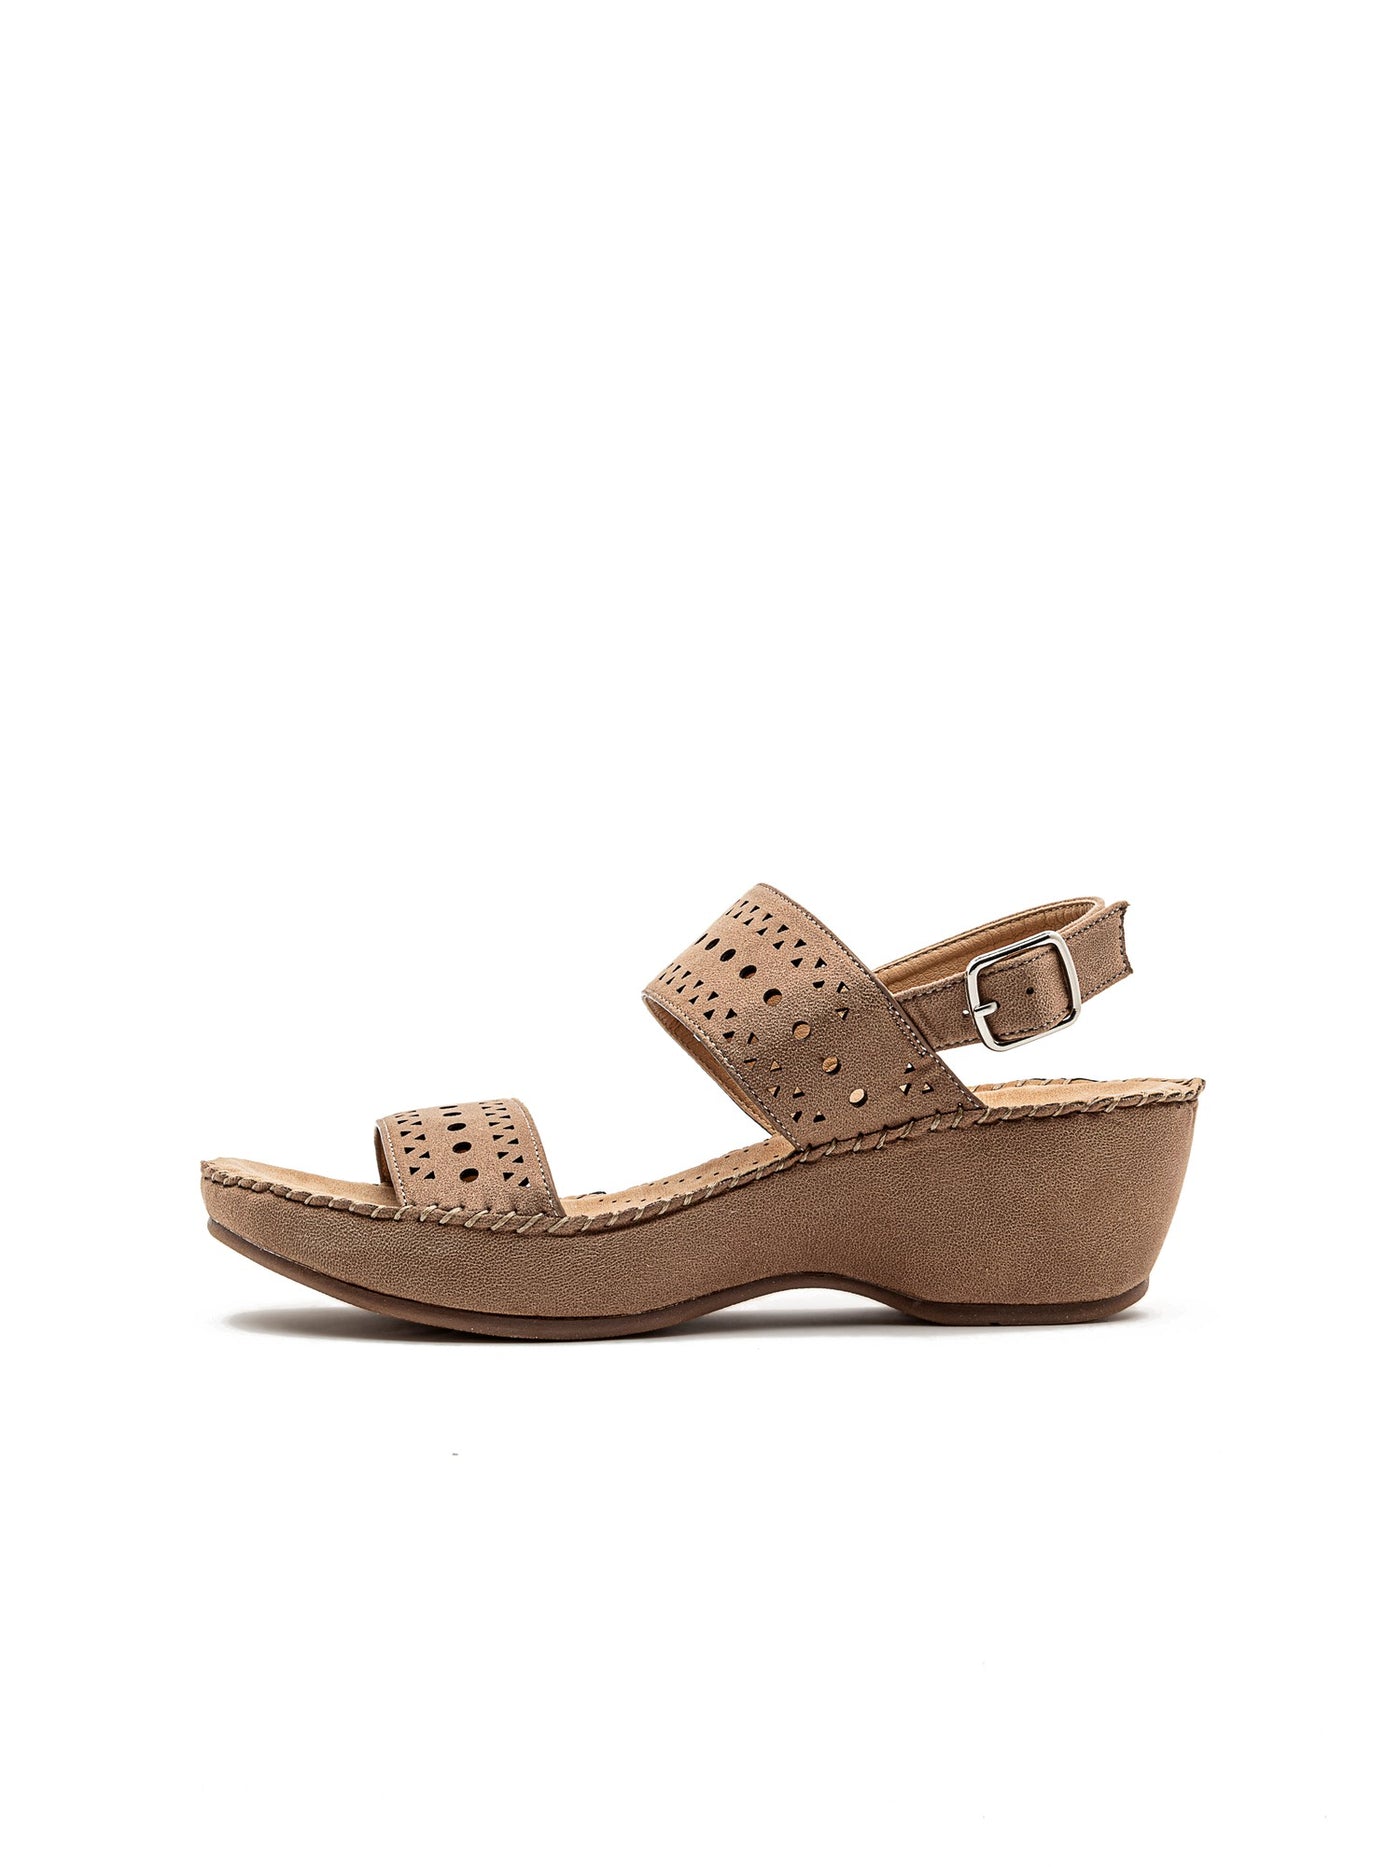 Shoeroom Womens Double Perforated Strap Platform Sandals